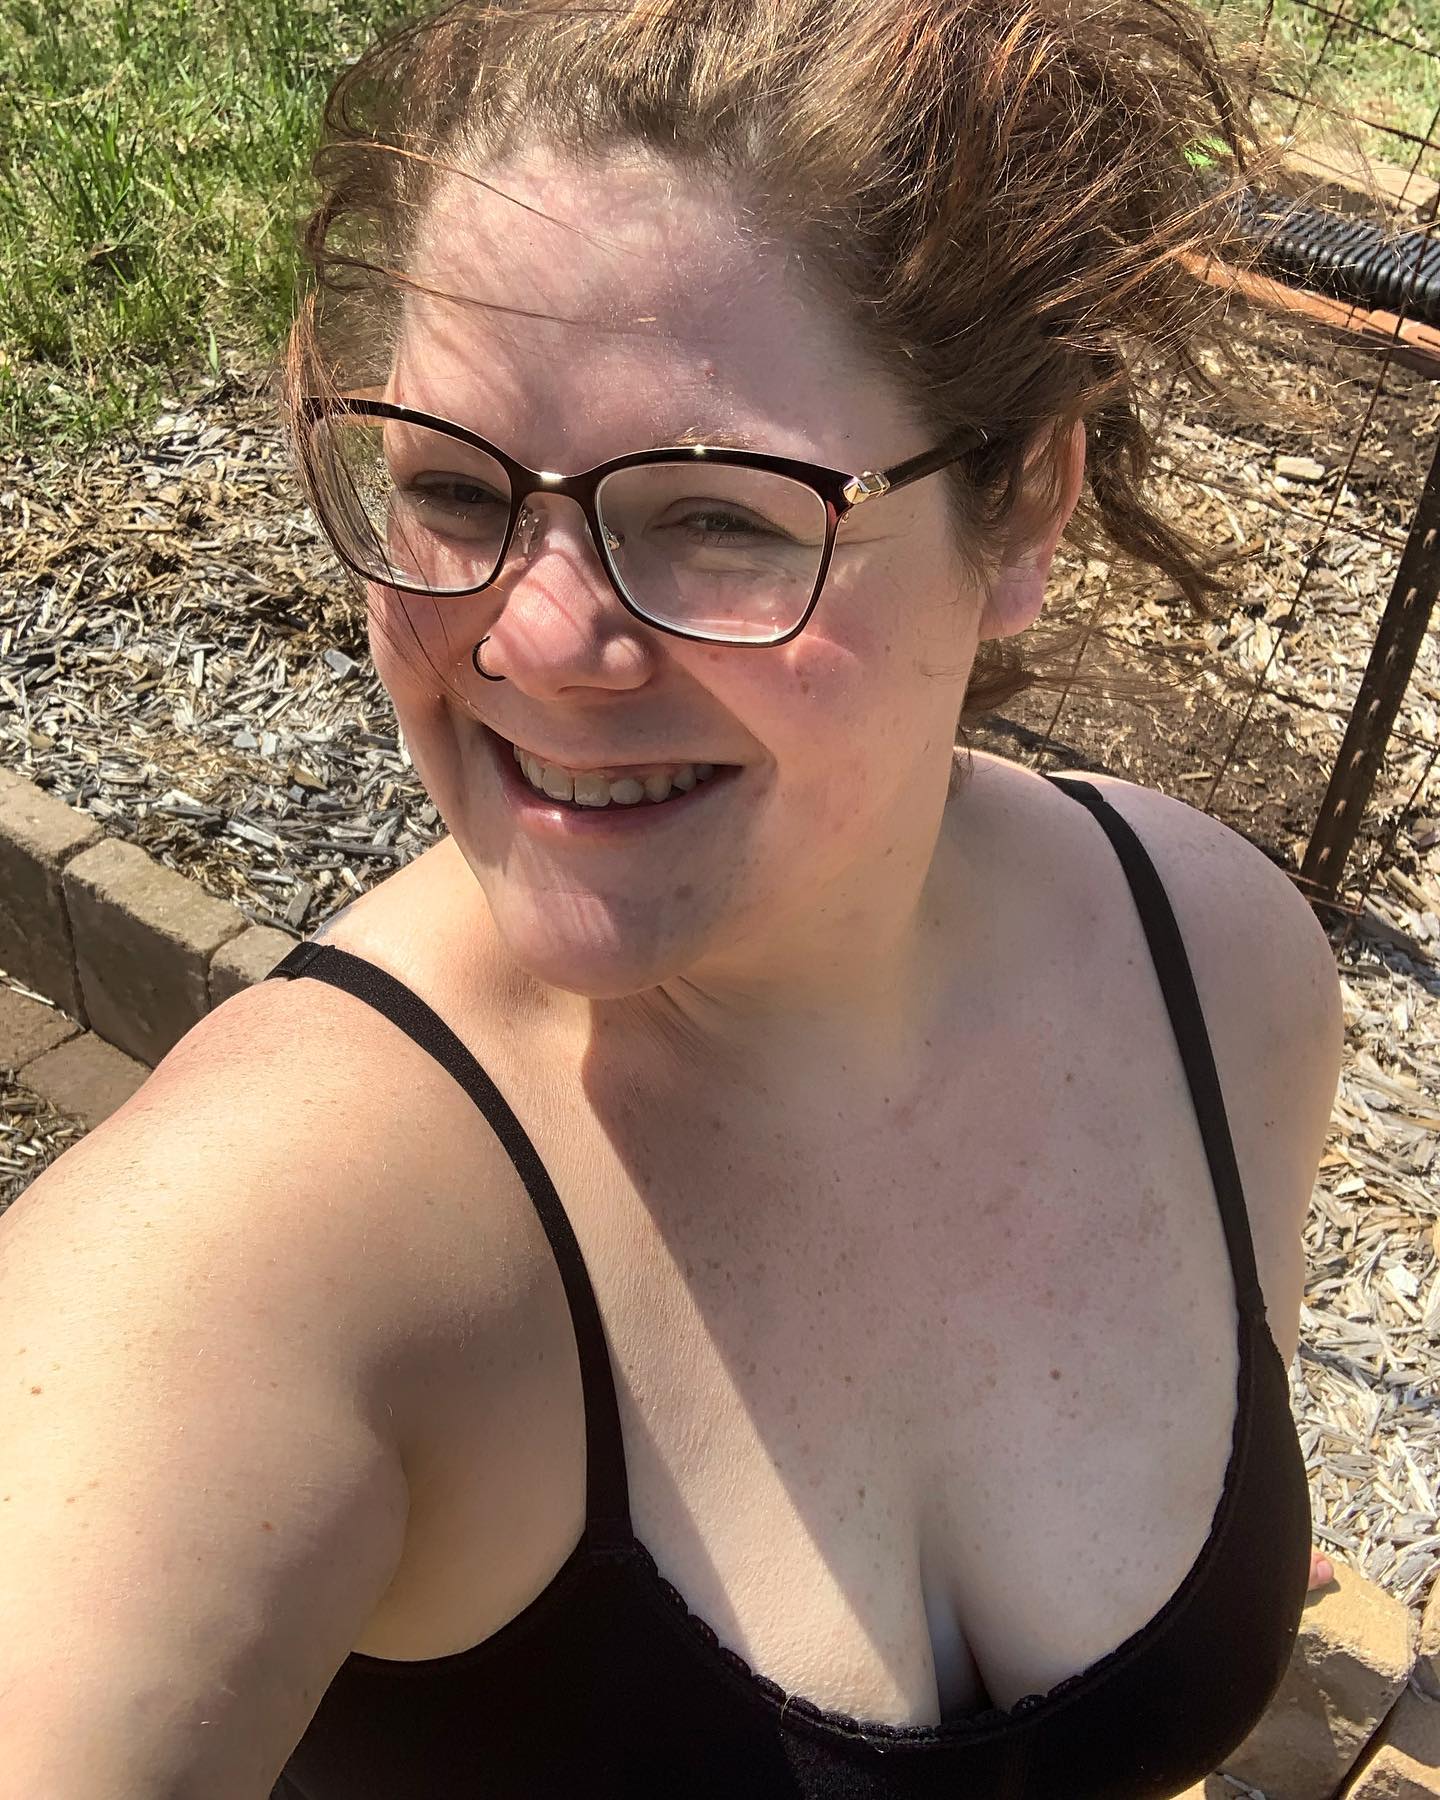 Working hard outside to get my garden ready! I’ll probably mostly plant hot peppers and tomatoes this year…maybe some cucumbers too 🤭
#autumnsnow #gardening #greenthumb #homesteadingmama #springtime